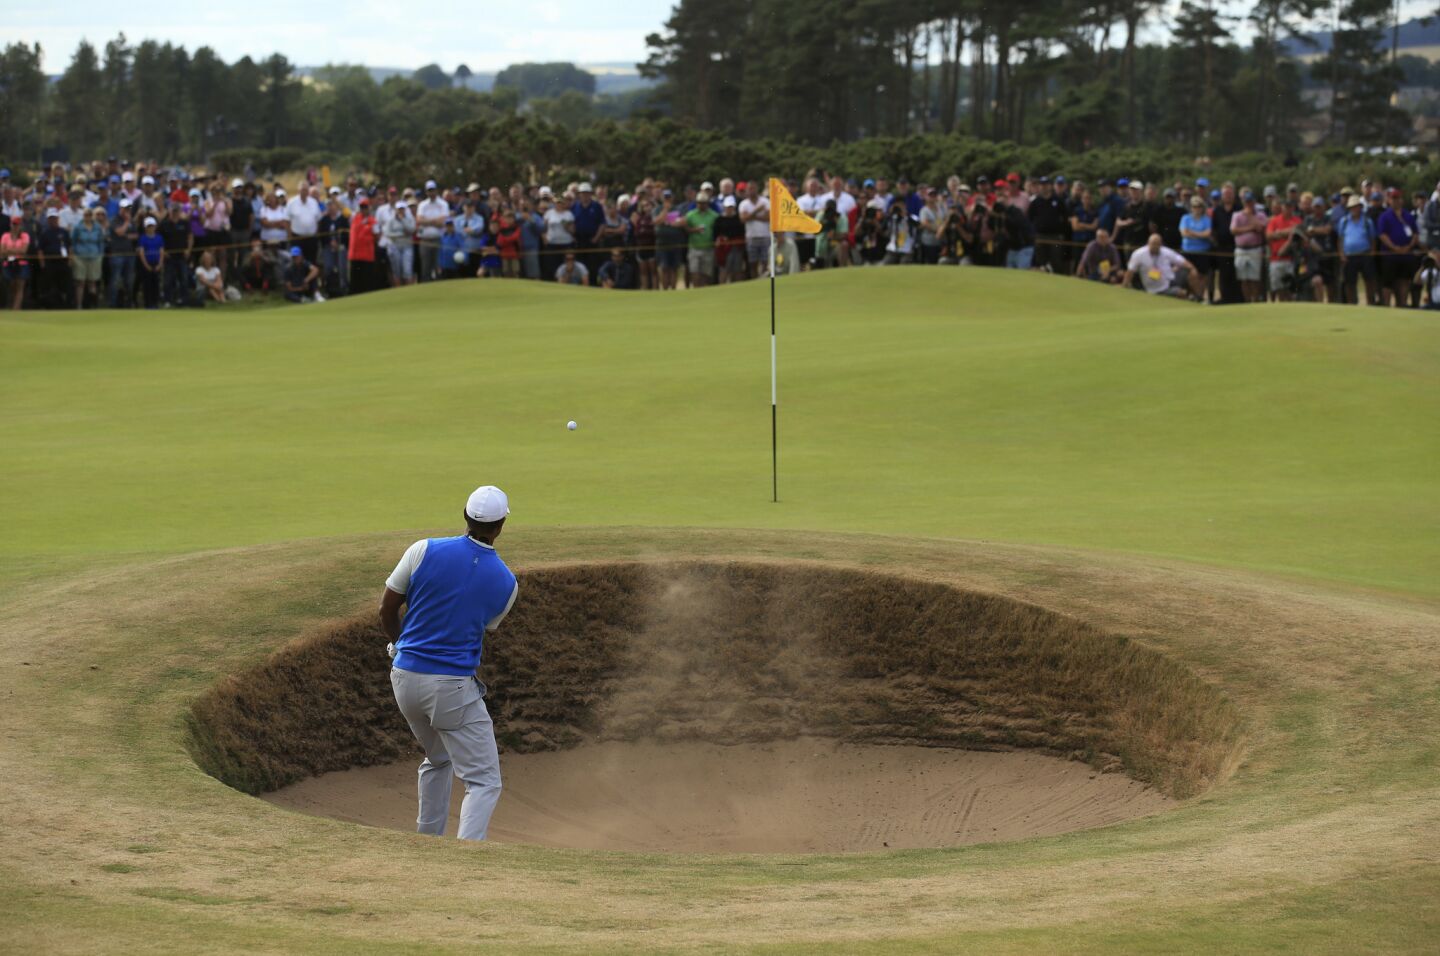 Tiger Woods plays from a greenside bunker on the sixth hole in the opening round of the British Open. Woods parred the hole and shot even par for his round.